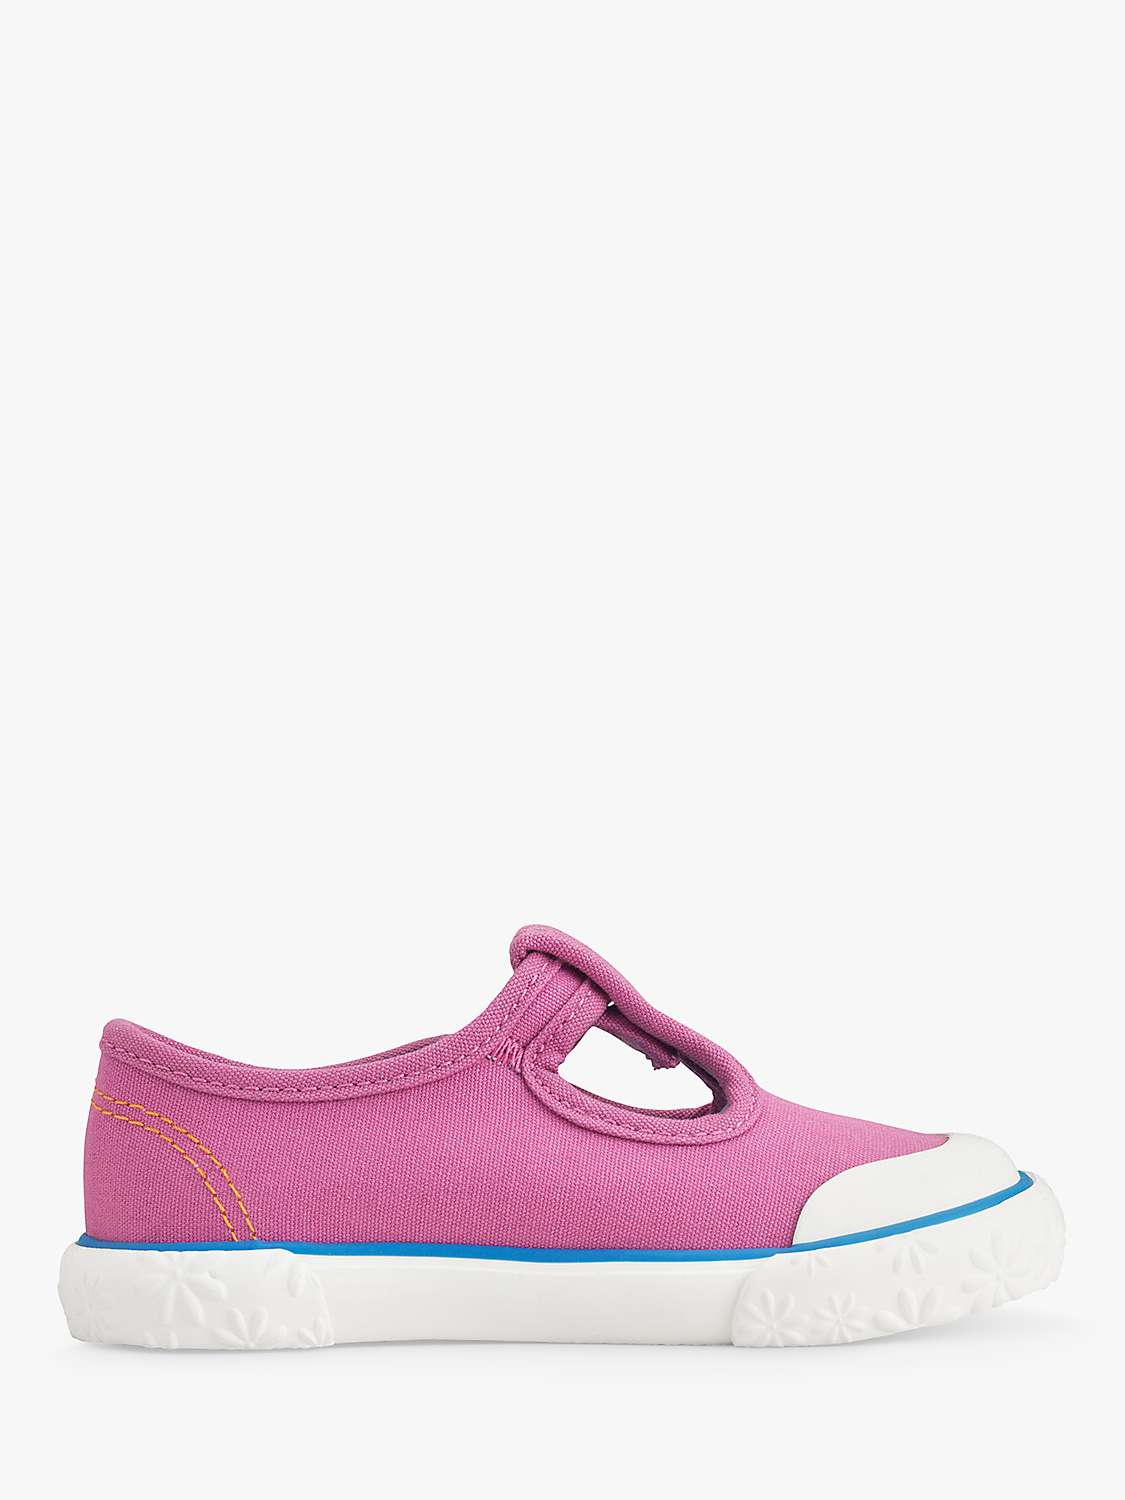 Buy Start-Rite’s Kids' Anchor Canvas Shoes Online at johnlewis.com